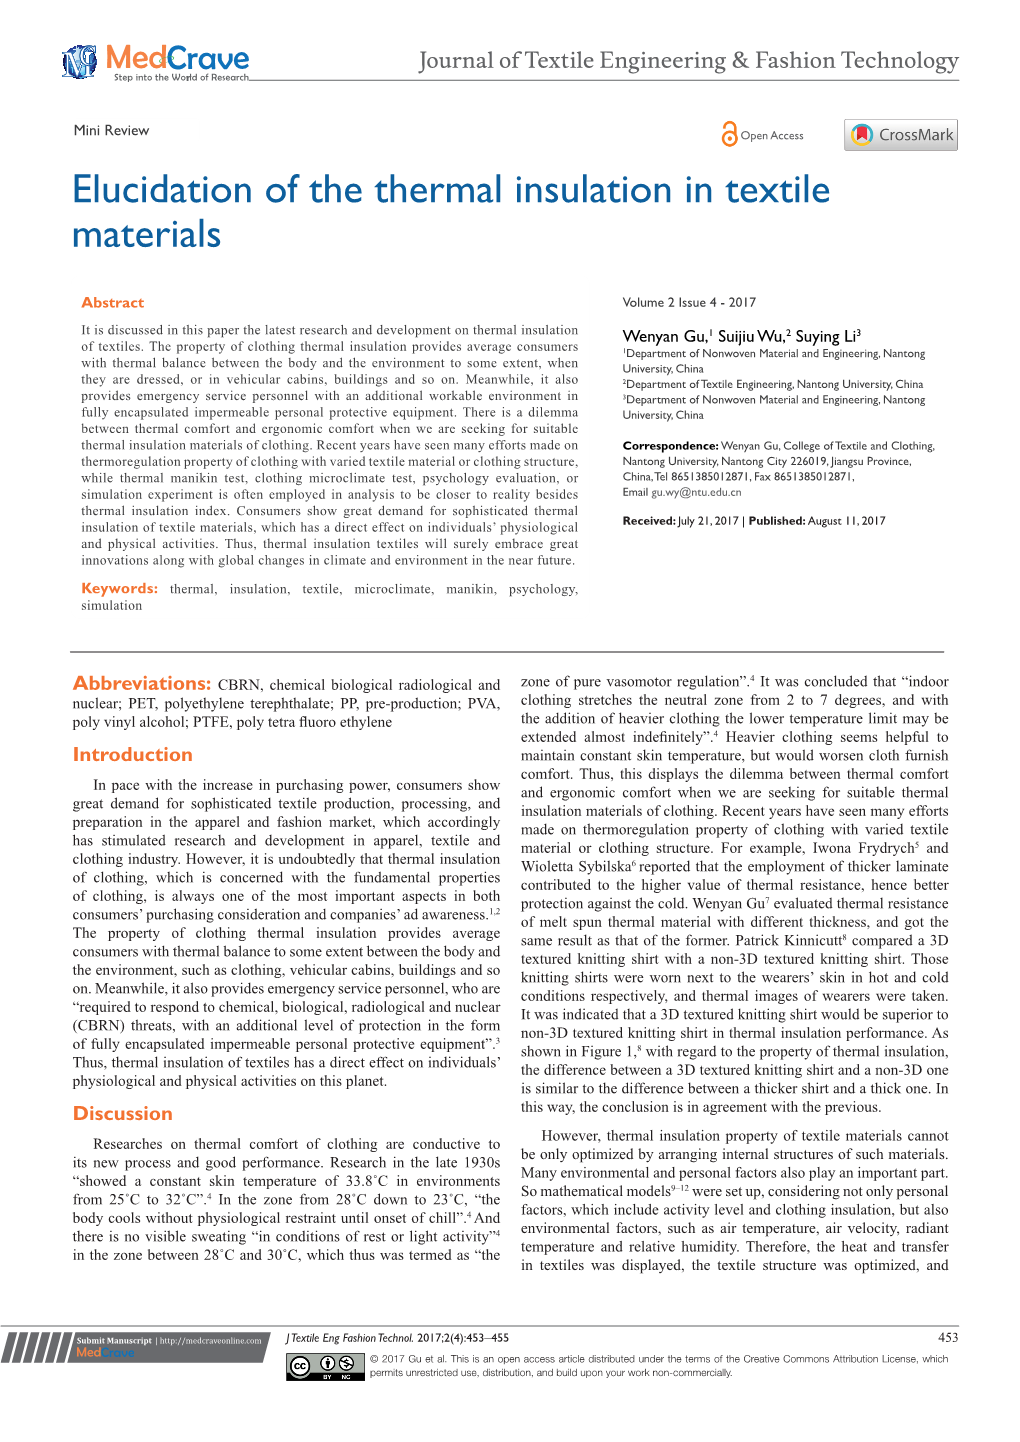 Elucidation of the Thermal Insulation in Textile Materials